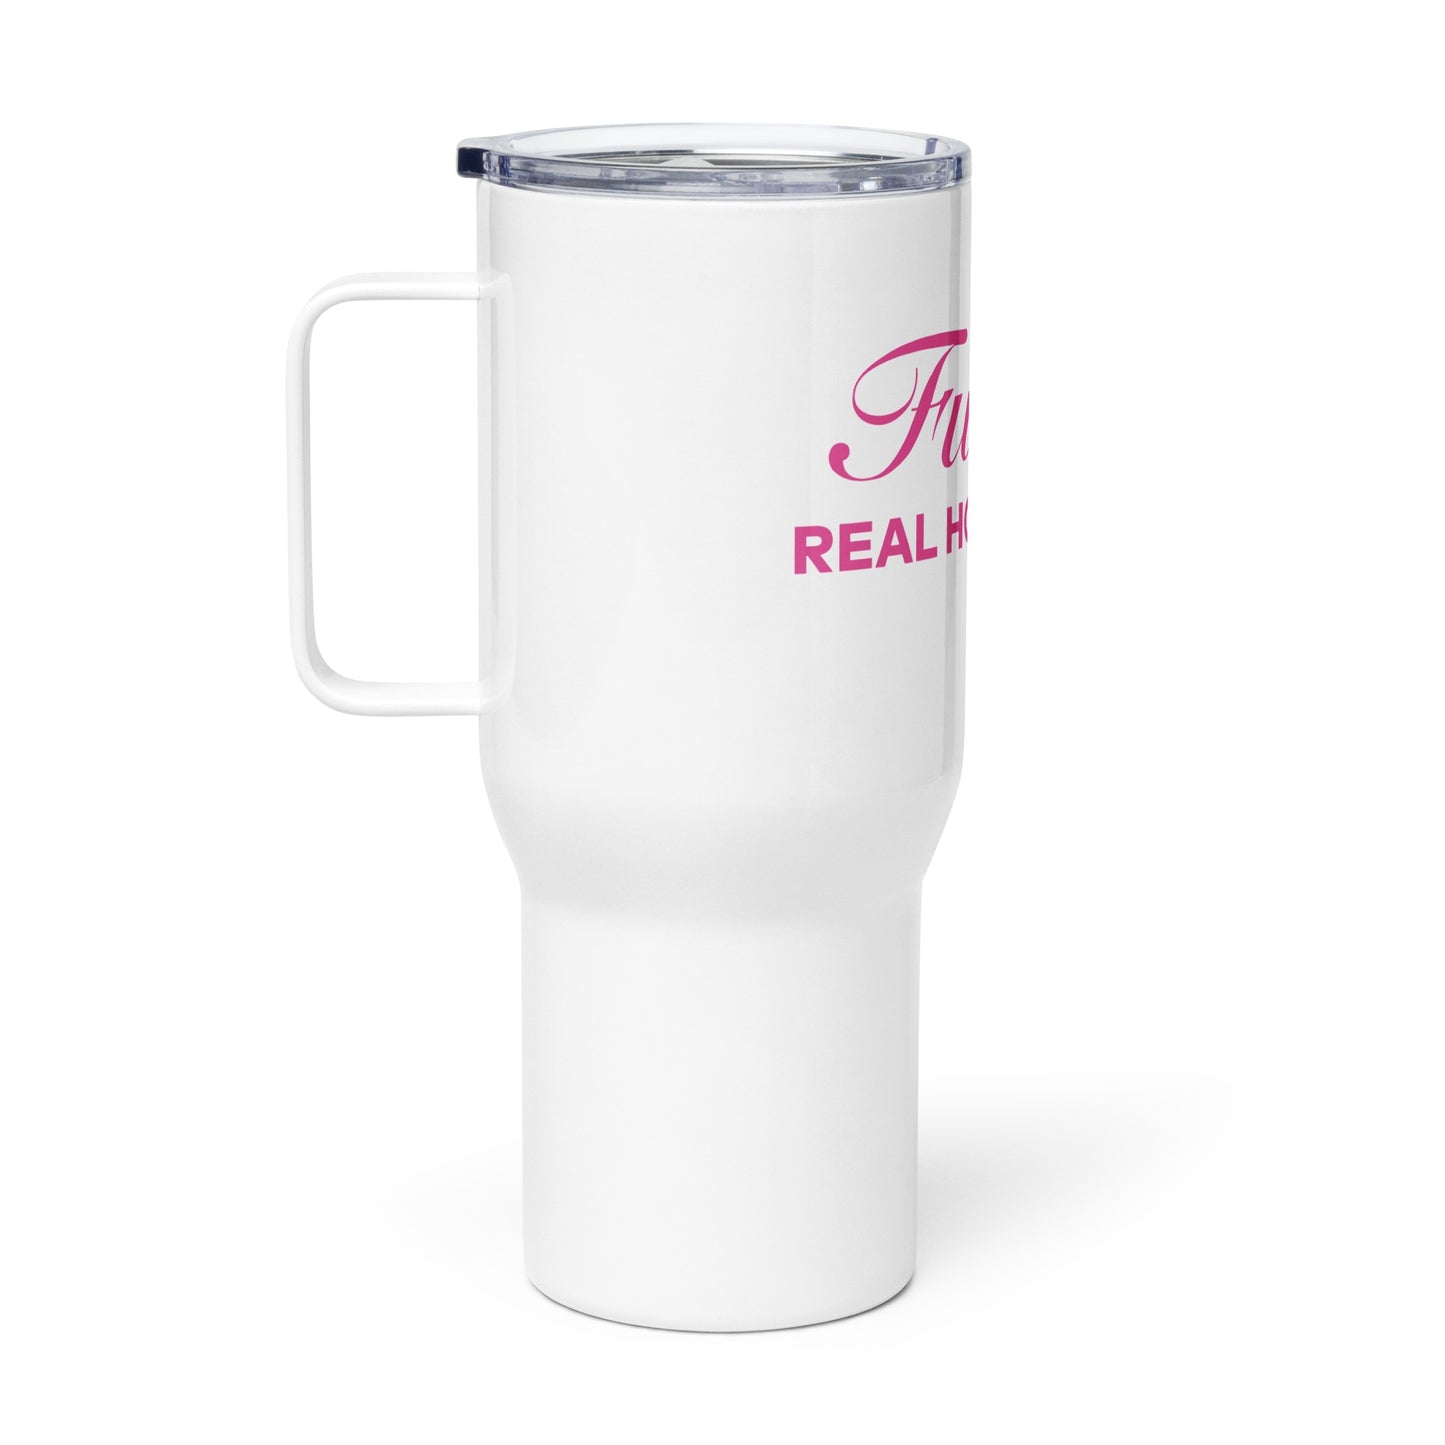 Future Real Housewife Quencher Tumbler